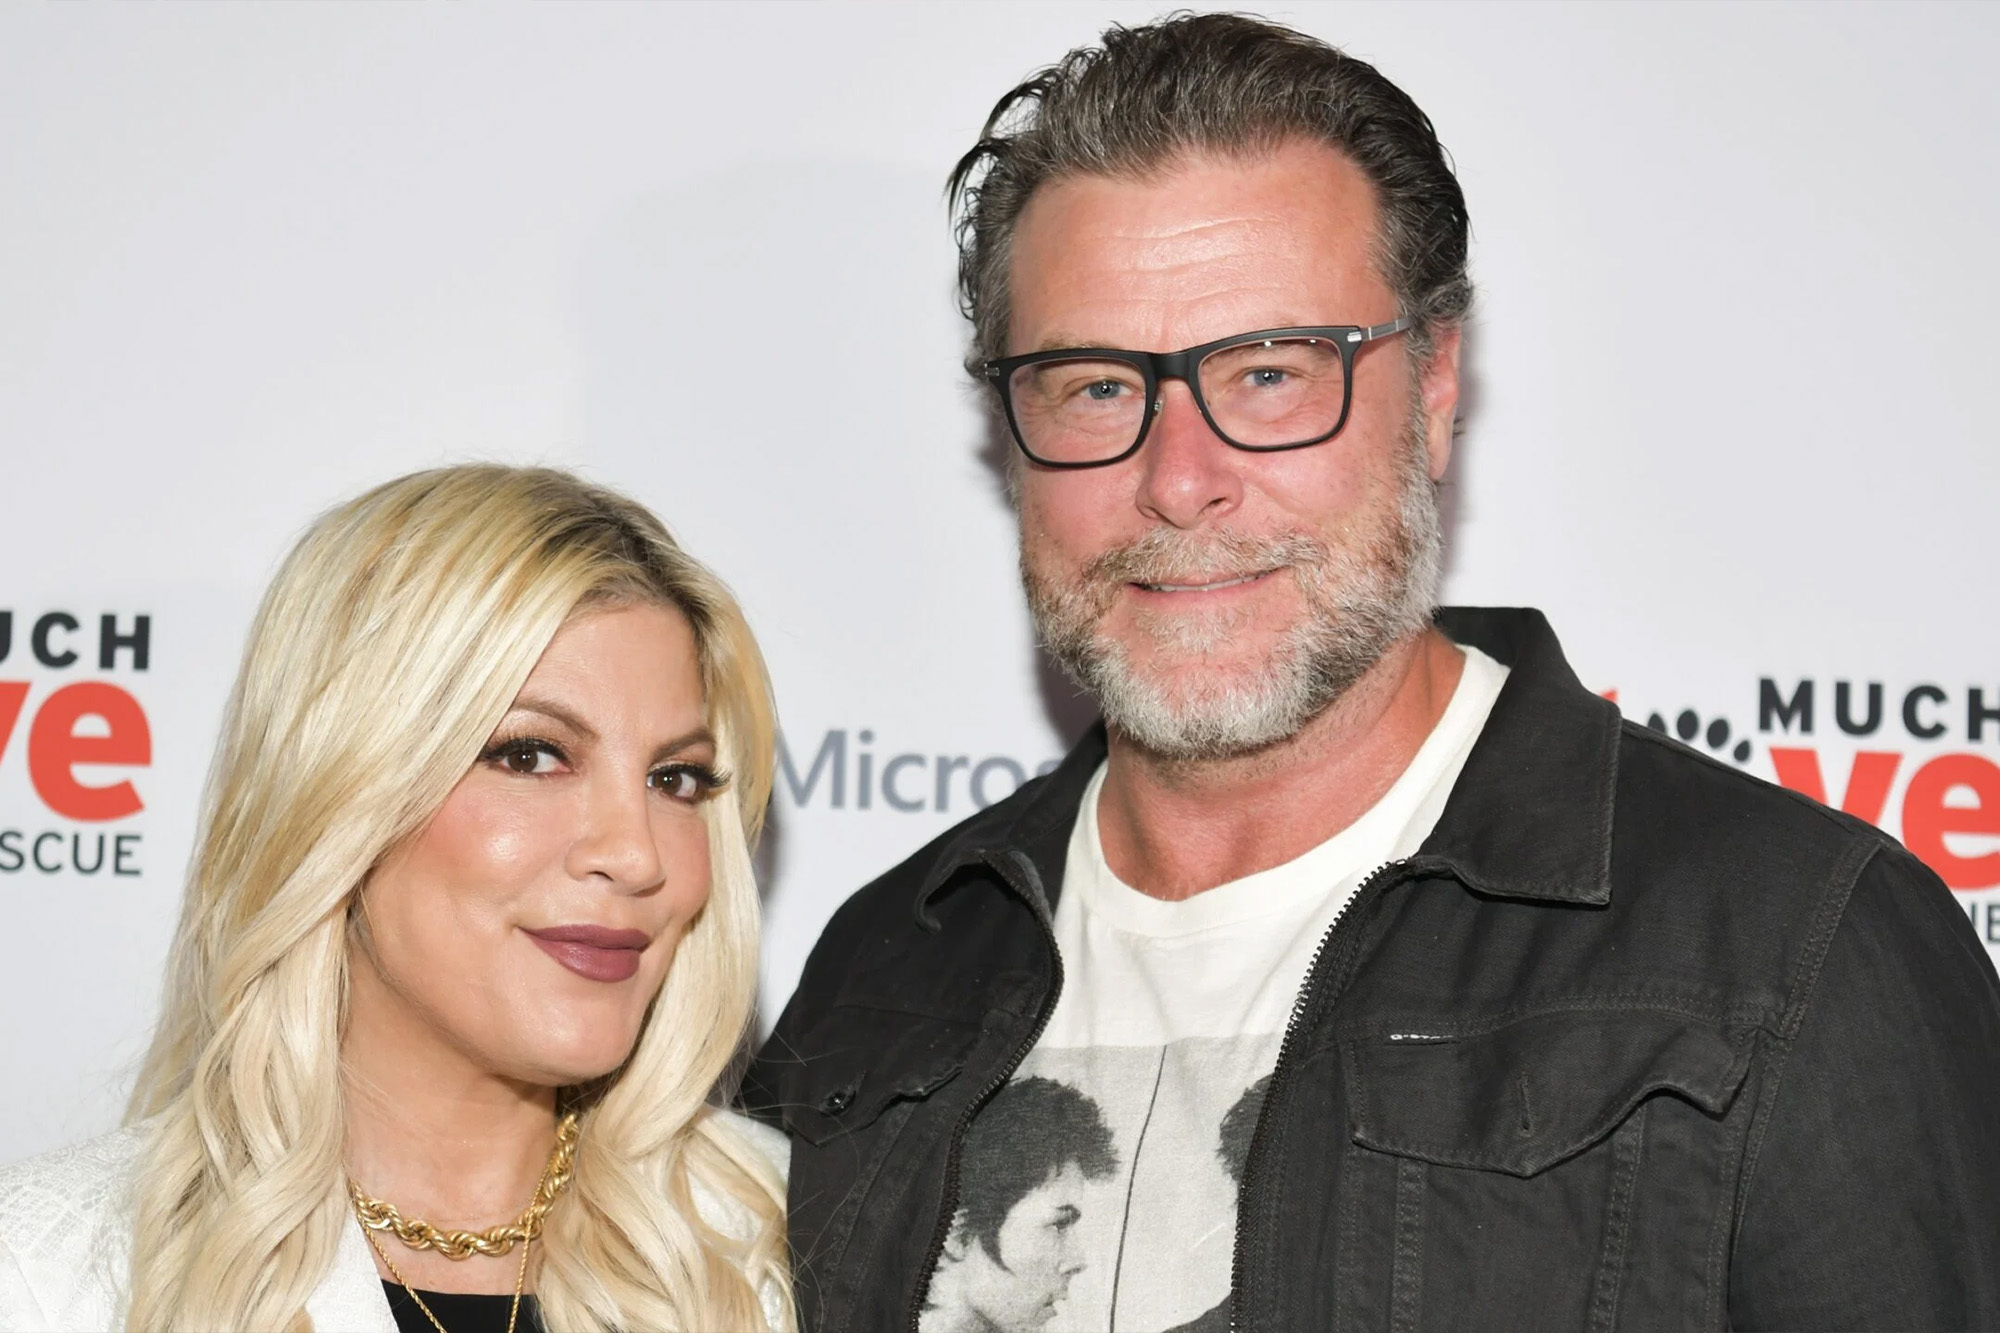 Dean McDermott says ex Tori Spelling ‘gets along fabulously’ with new girlfriend